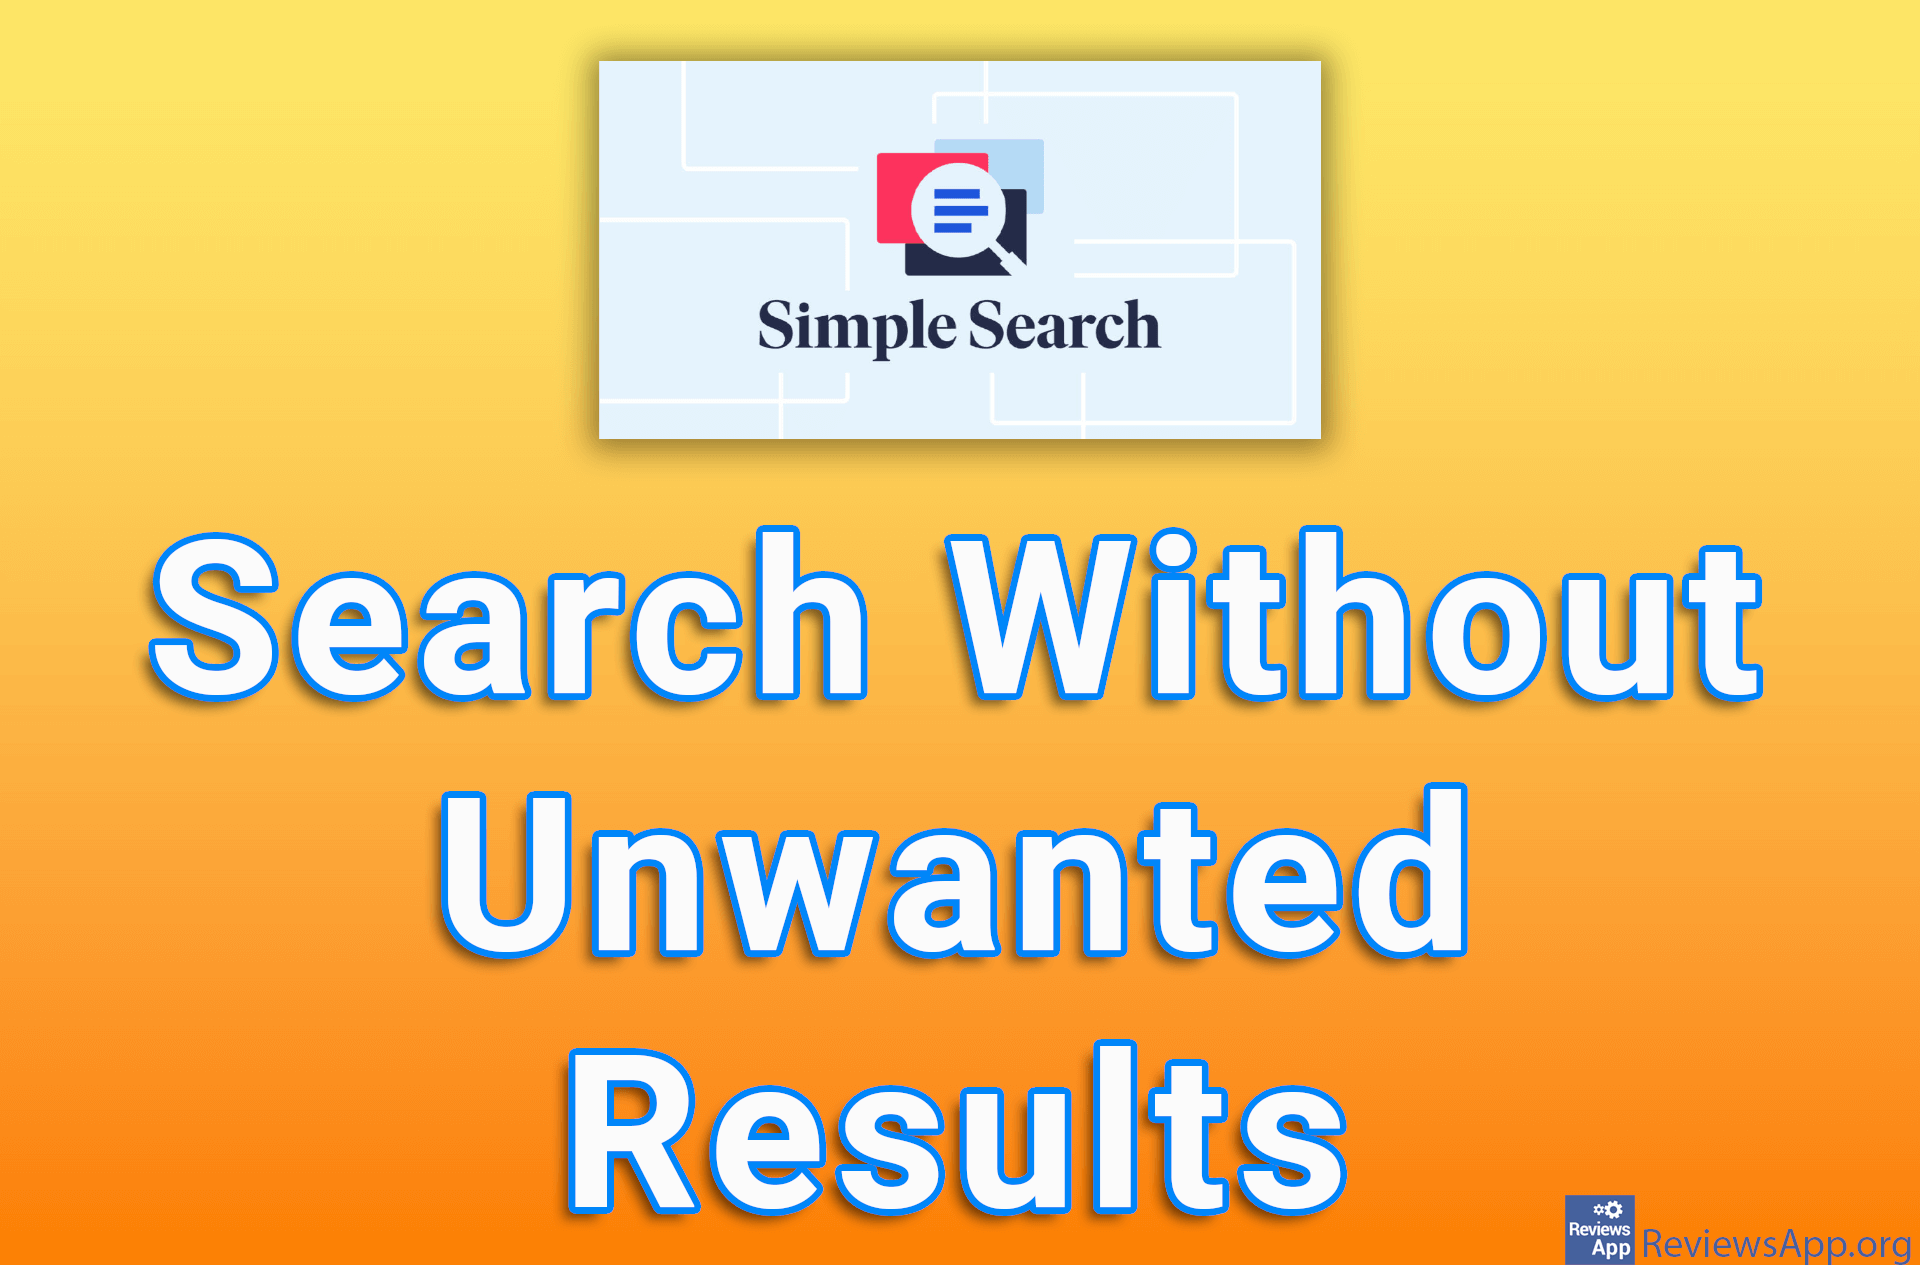 Simple Search – Search Without Unwanted Results